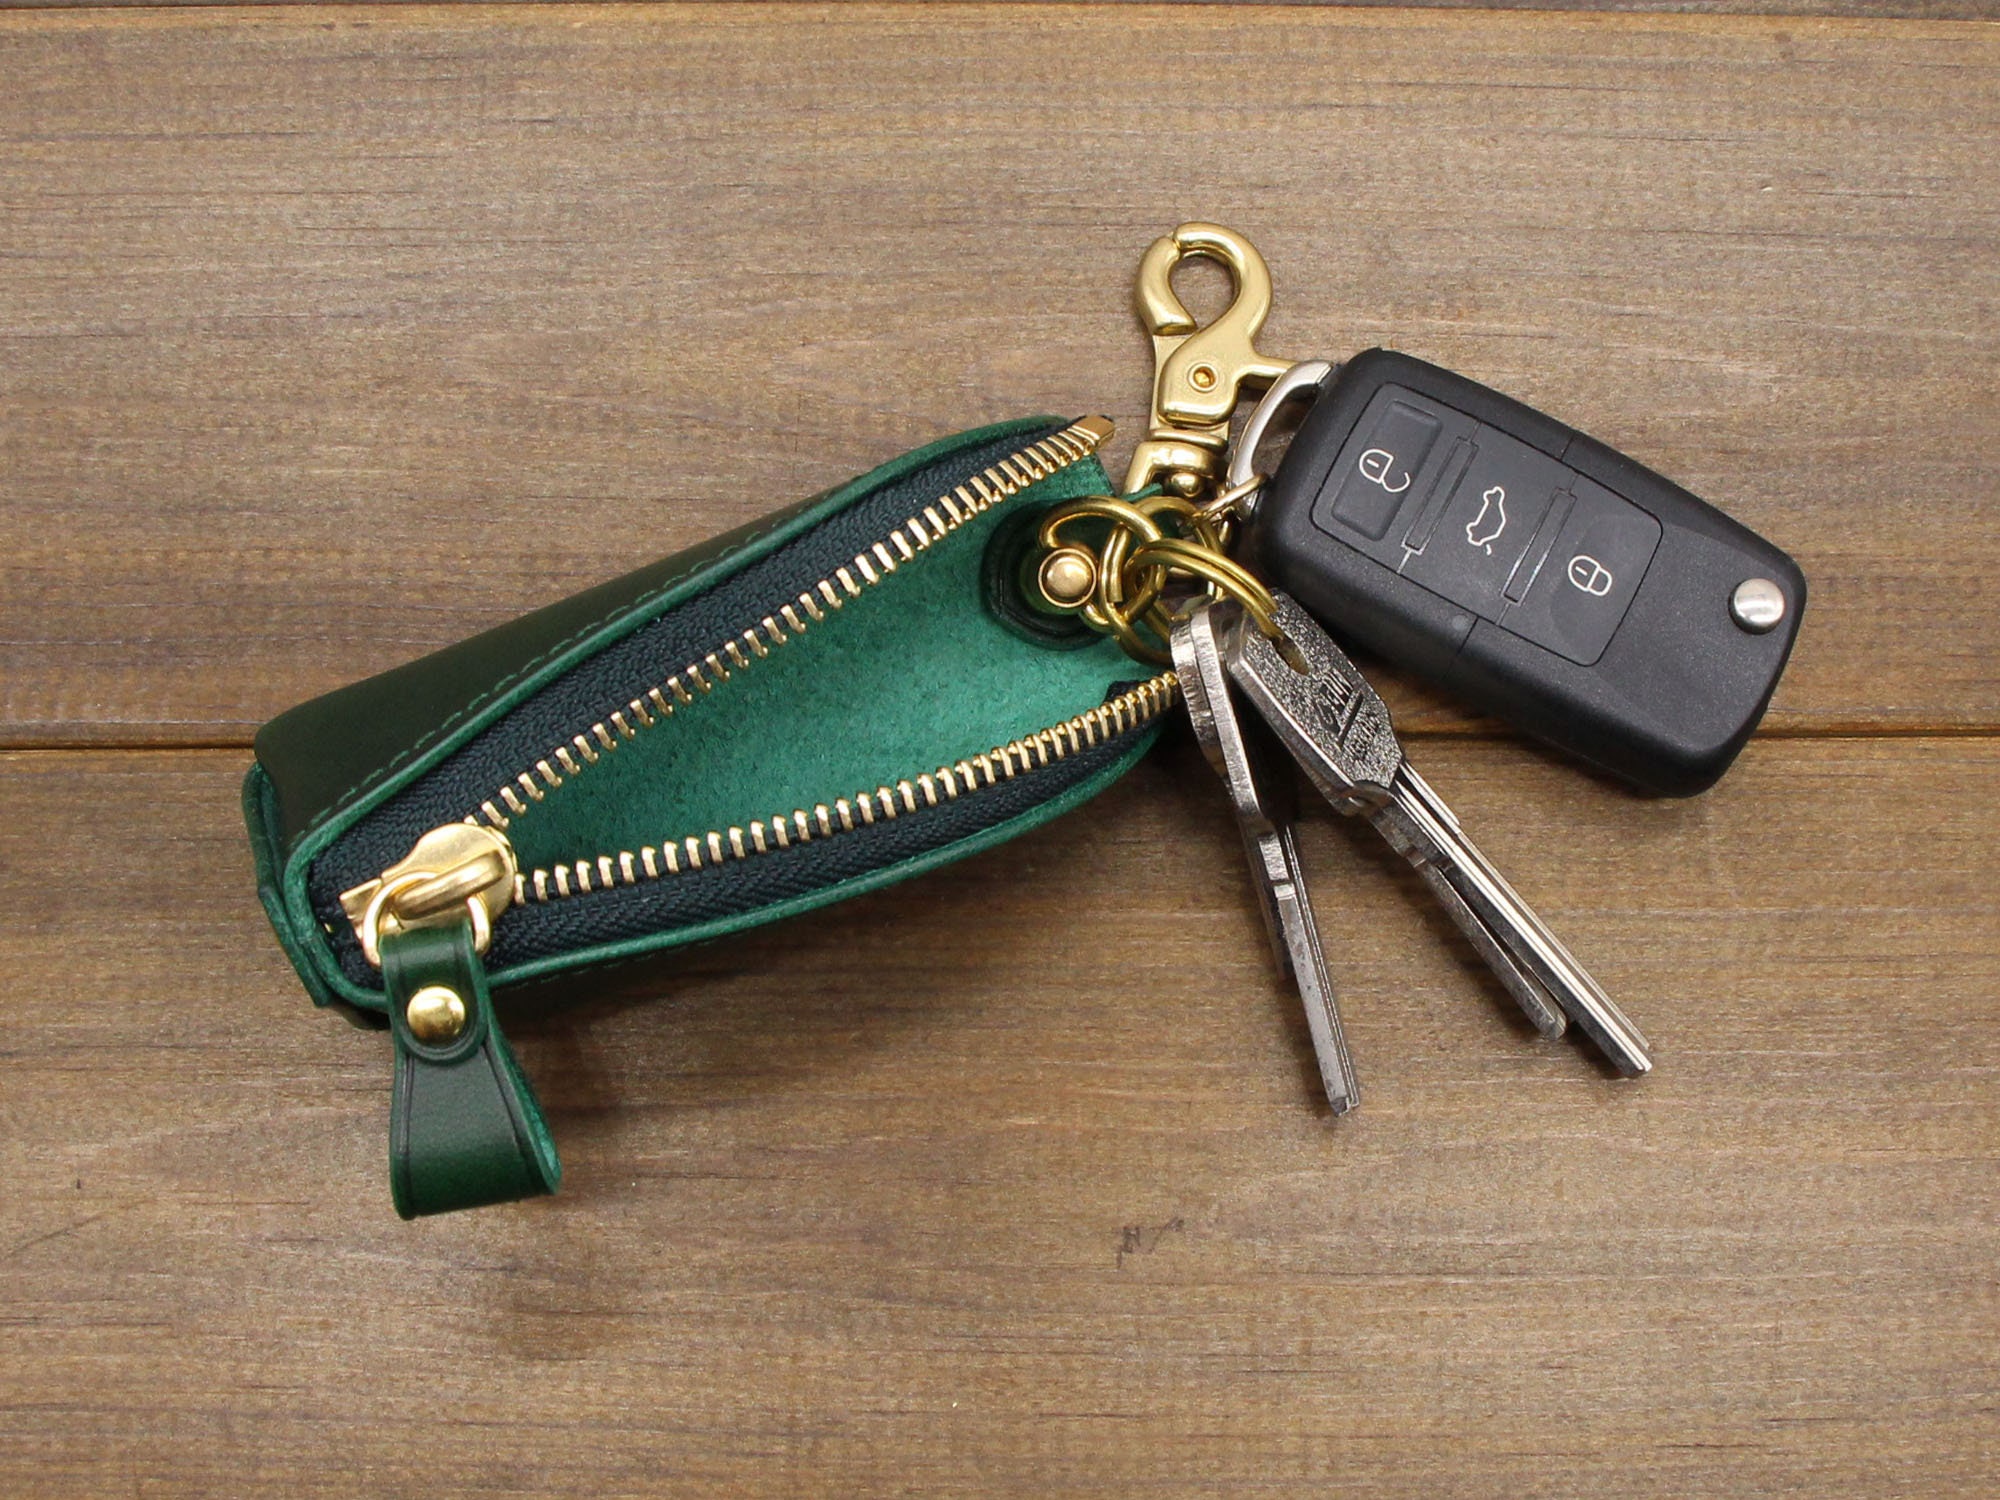 Handmade leather car key cases with name stamping service.(made to order)  Thank you for your support. #Vitmehandcraft #Handmade #Carkeys #Keycase